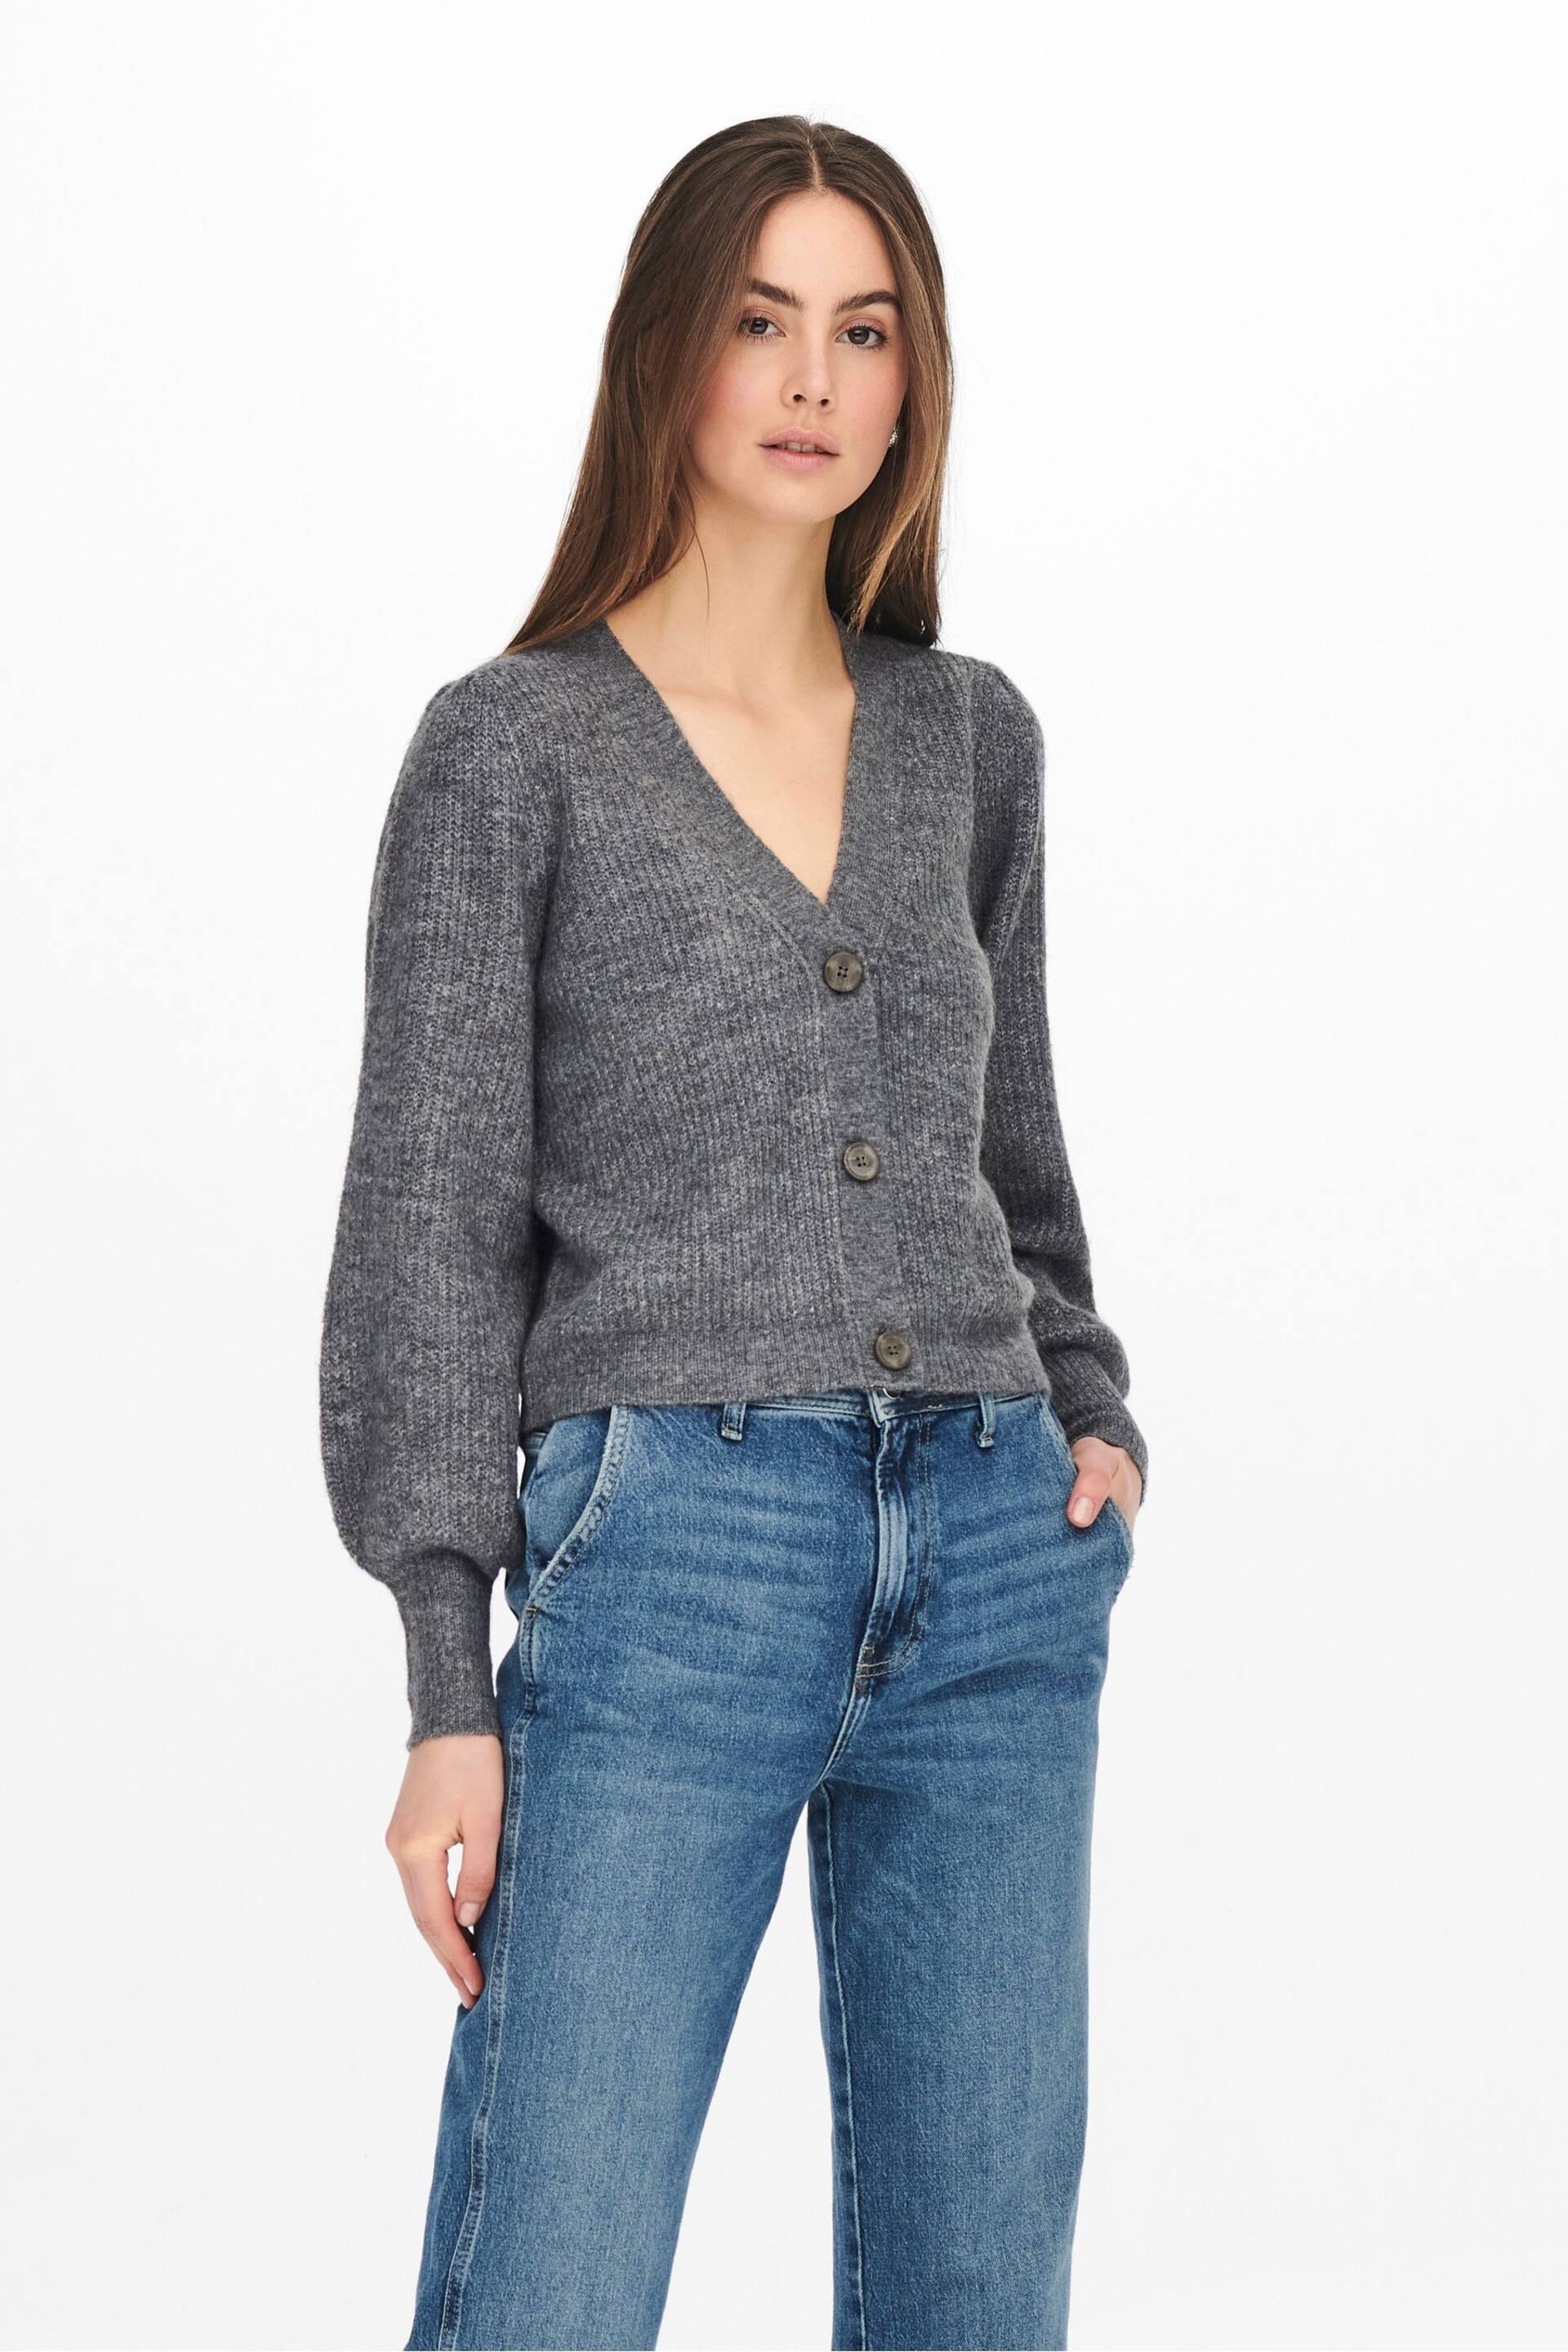 JDY Grey Soft Touch Puff Sleeve Cardigan Jumper - Image 3 of 5